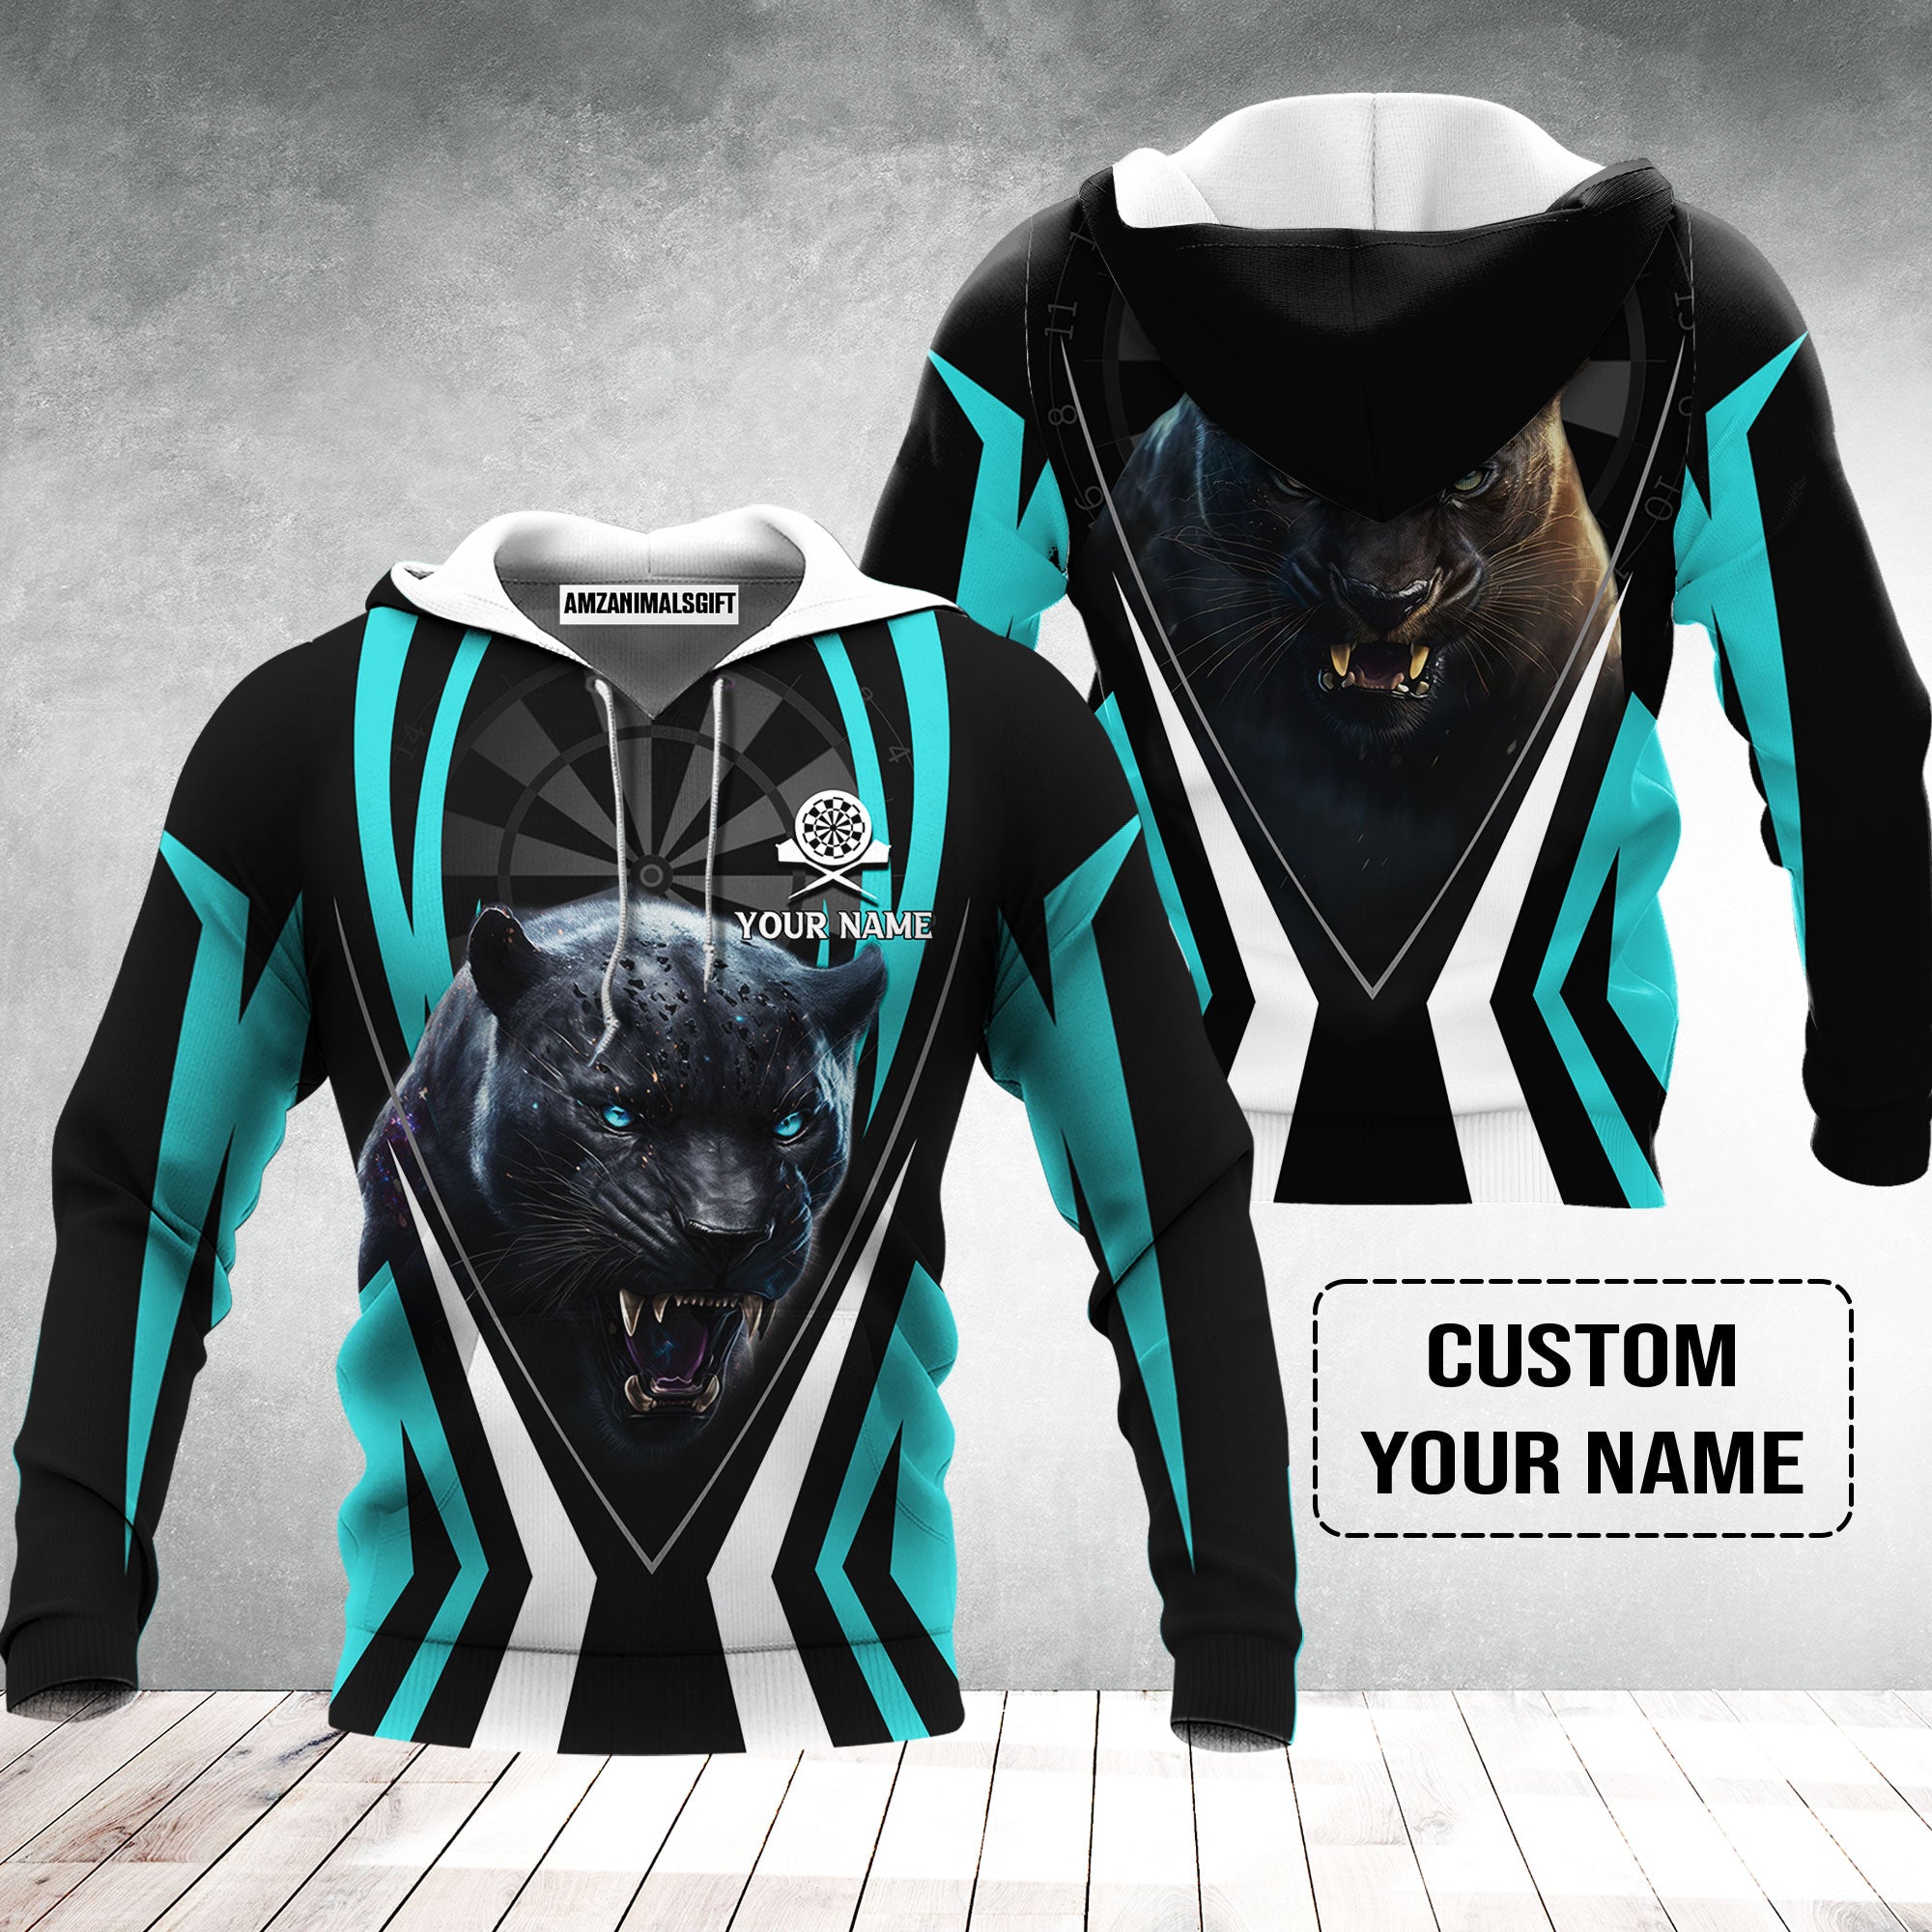 Black Panther And Darts Custom Name Hoodie, Bullseye Dartboard Personalized Hoodie - Gift For Darts Lovers, Friends